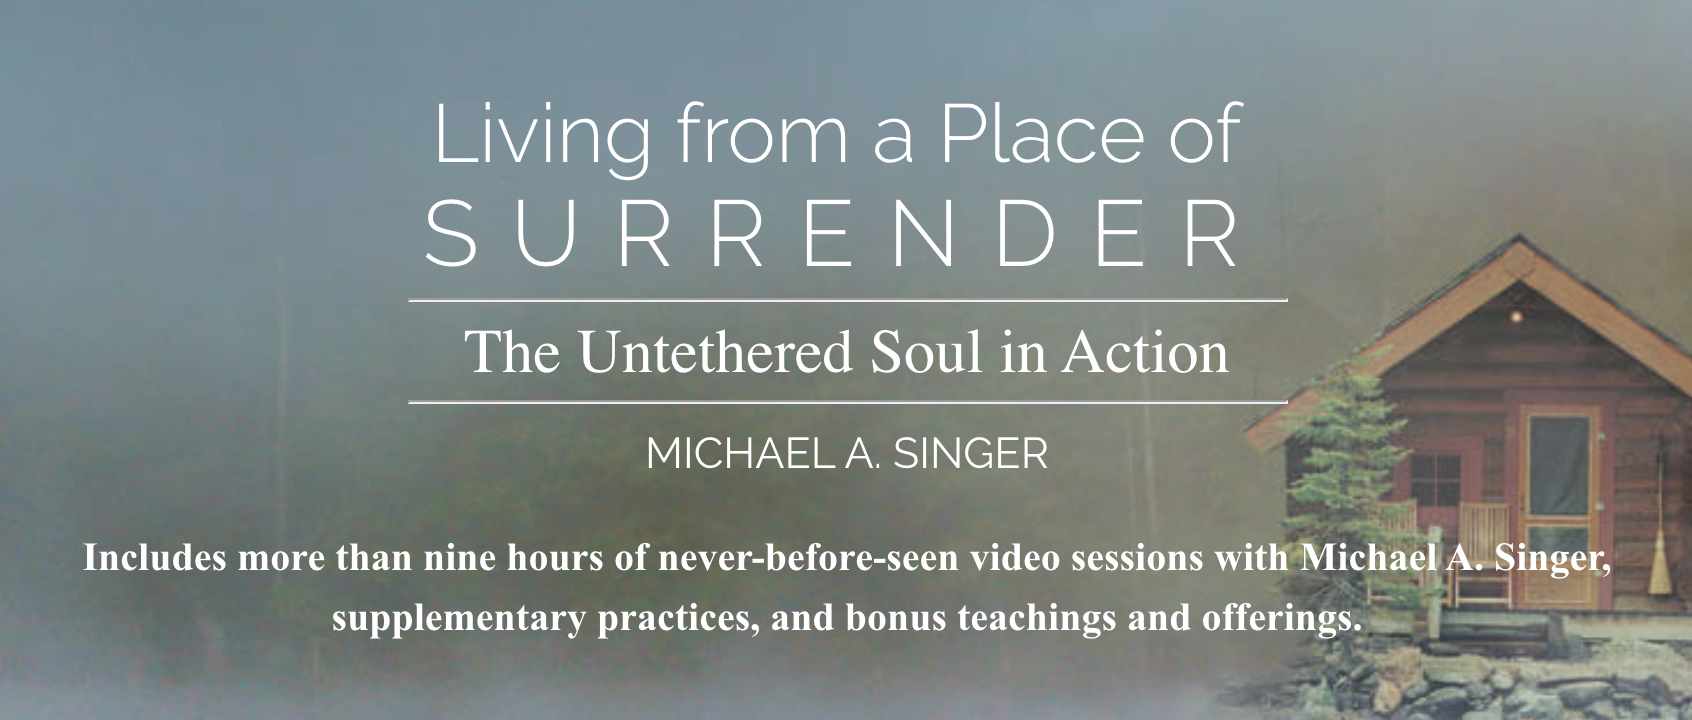 Untethered Soul in Action Course